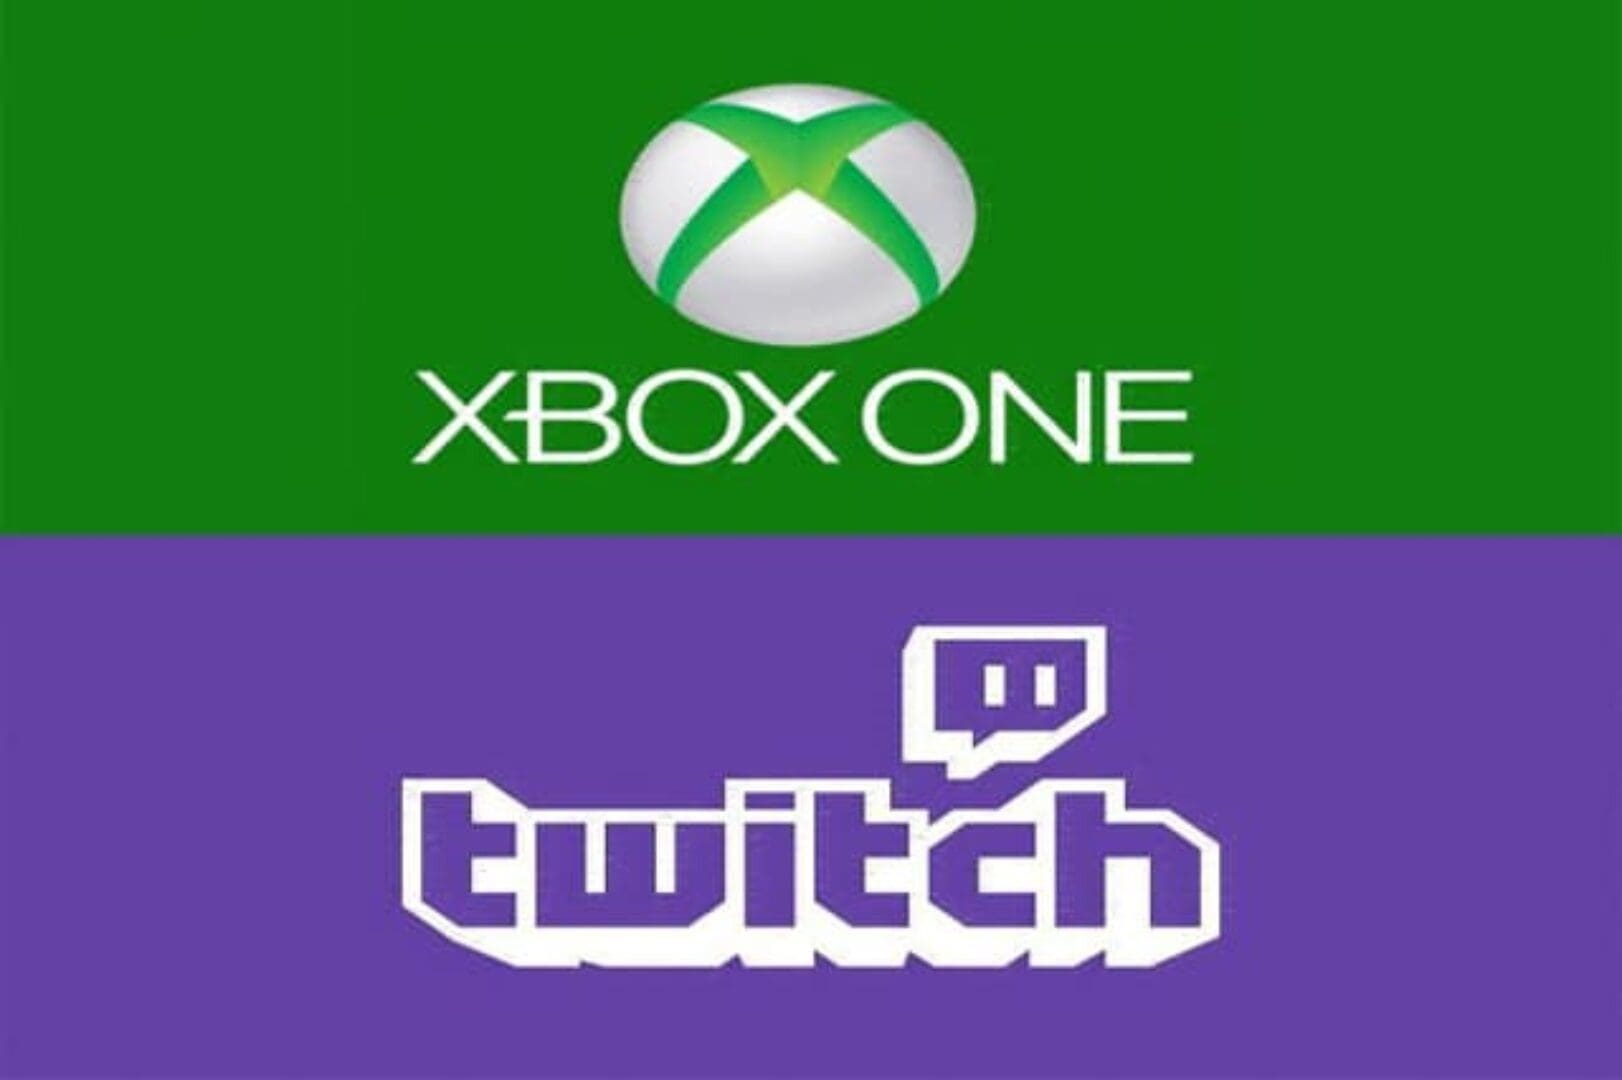 Party Chat Now Broadcasts with Twitch App on Xbox One